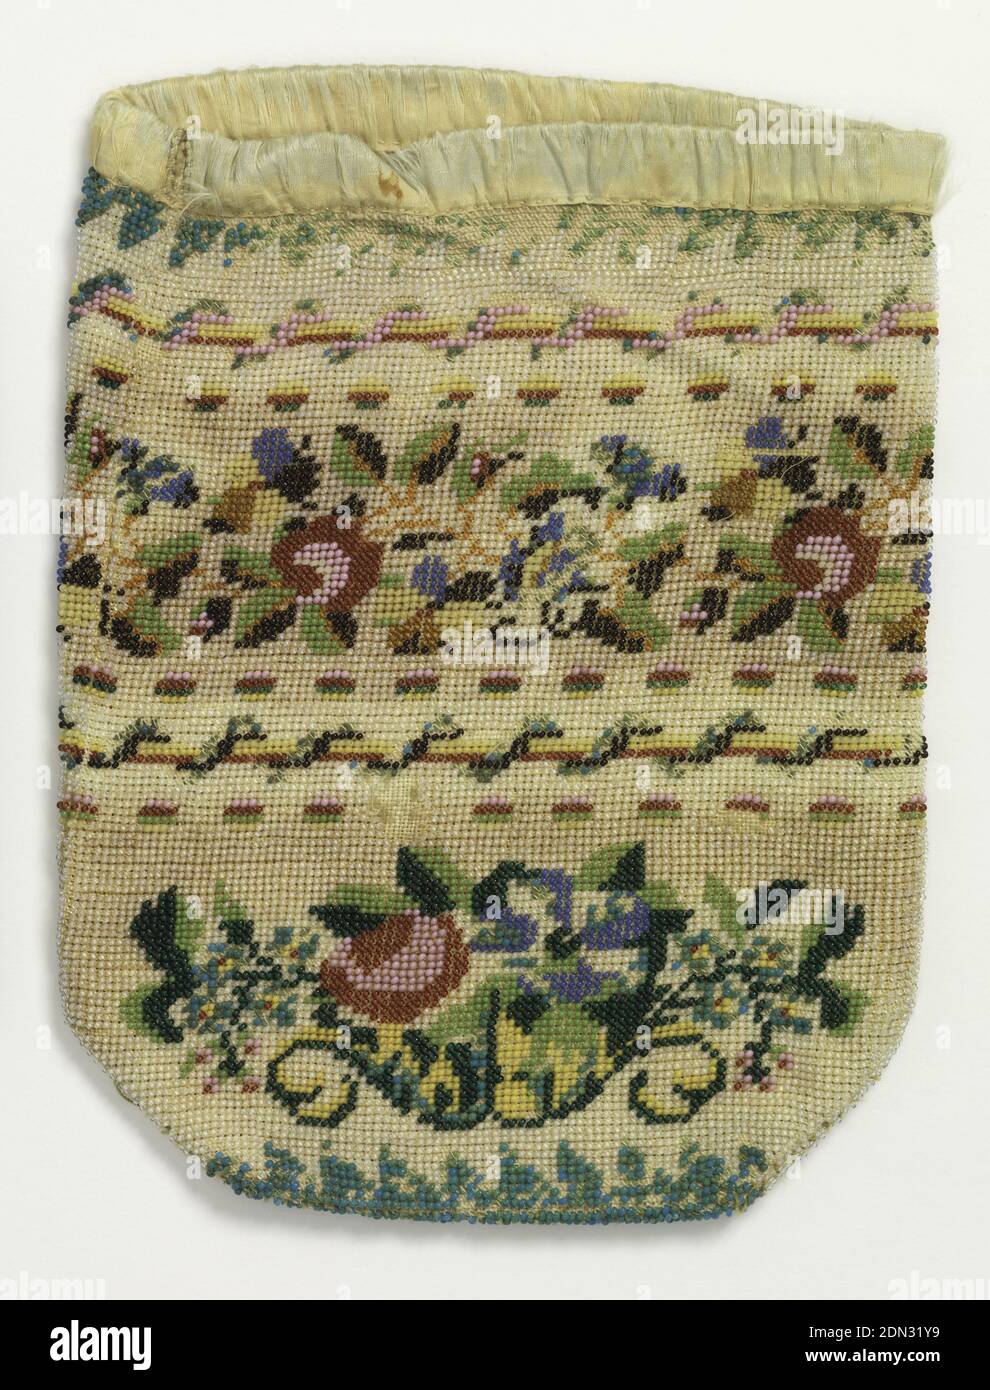 Bag, Medium: cotton, glass and ceramic beads Technique: embroidered beadwork, Colored glass beads strung and stitched to cotton foundation, with a design of cornucopias of flowers, with twined-rope borders. Bound with ribbon at the top., USA, early 19th century, costume & accessories, Bag Stock Photo